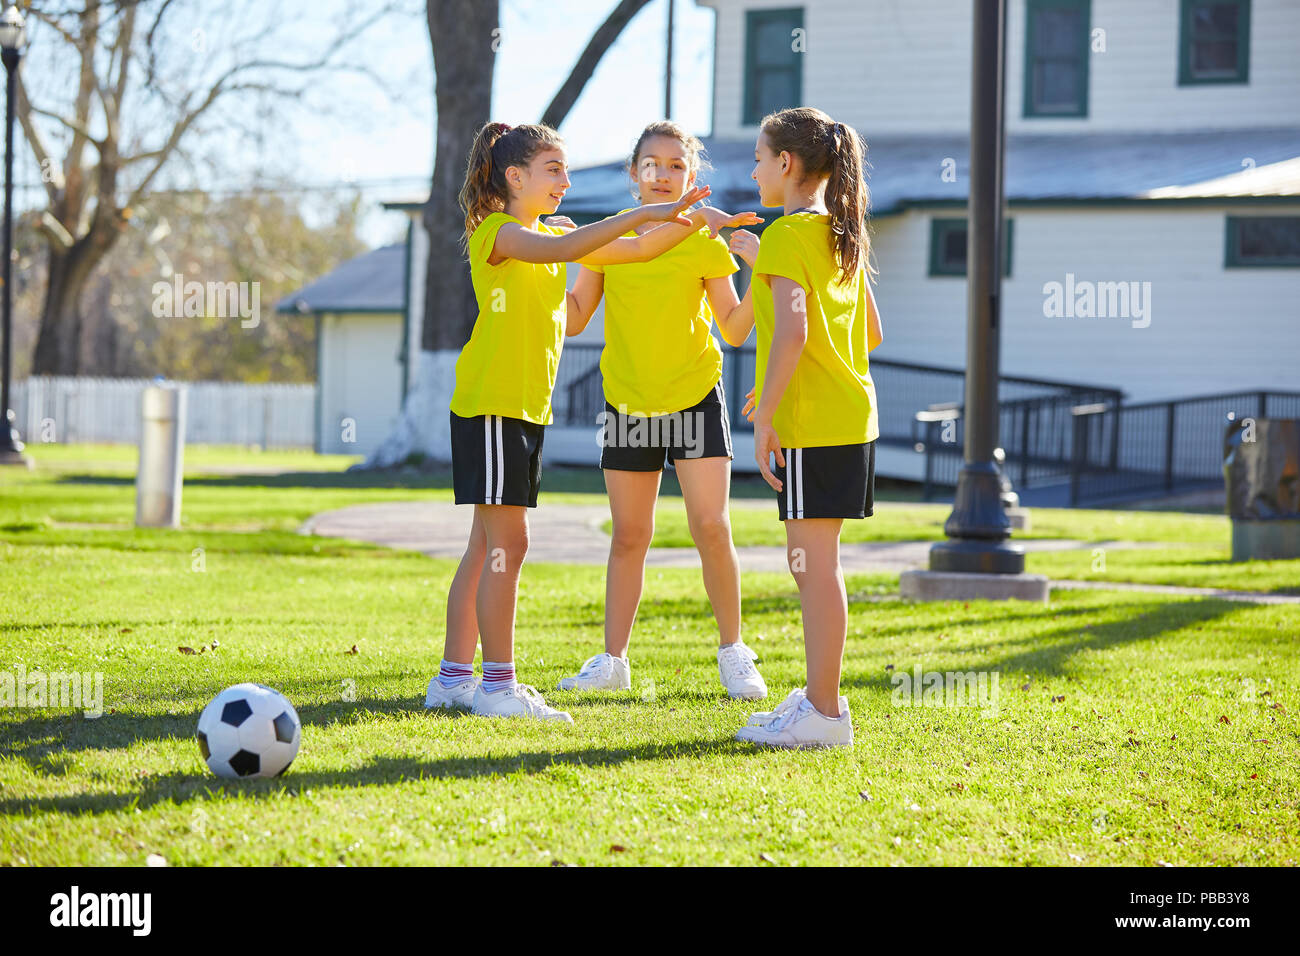 Teen girls group exercise workout at park Stock Photo